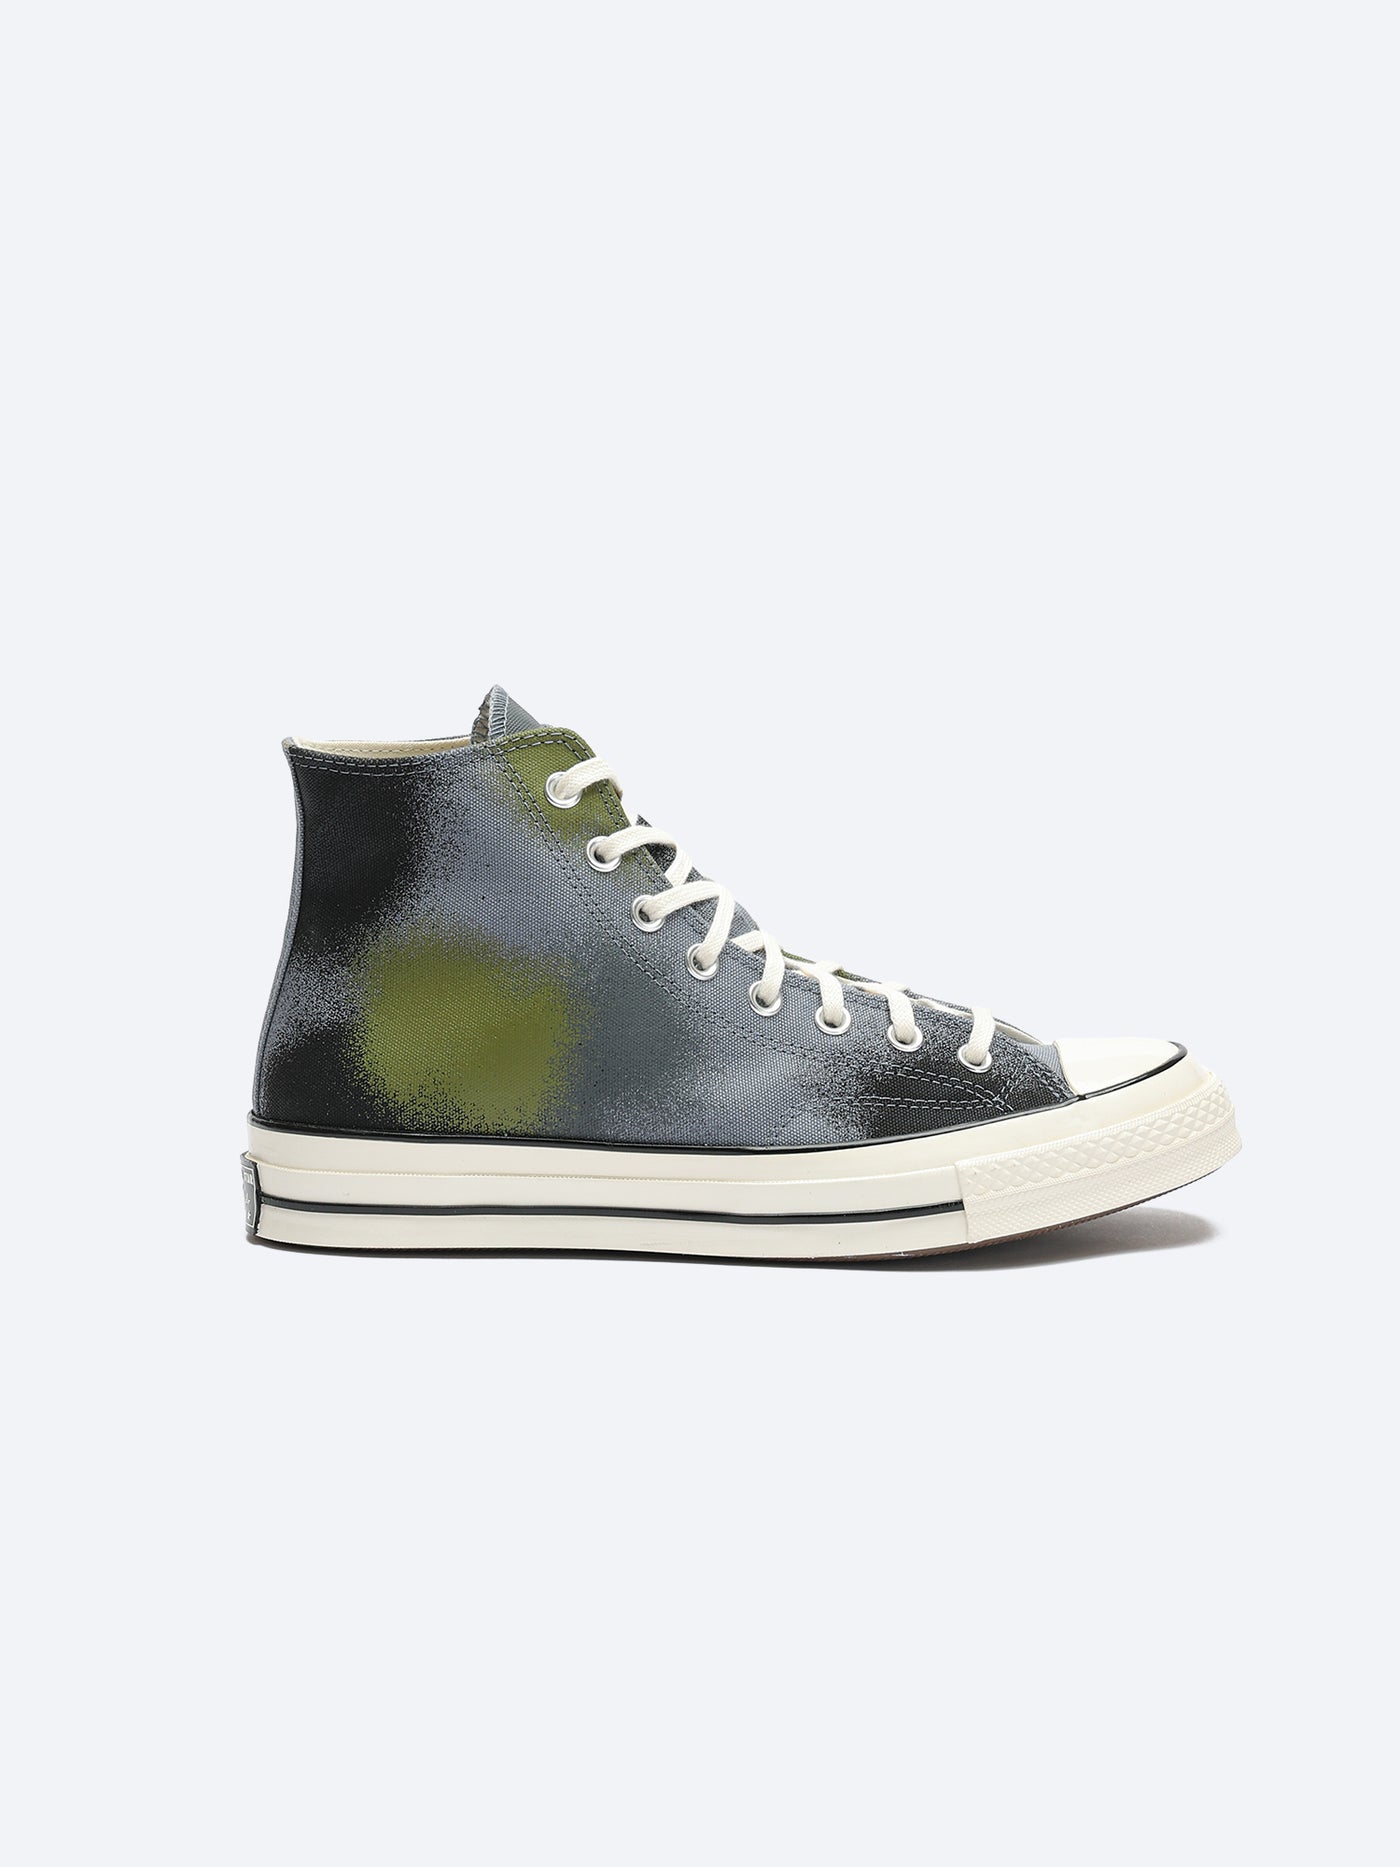 Sneakers - Chuck 70 - Spray Paint